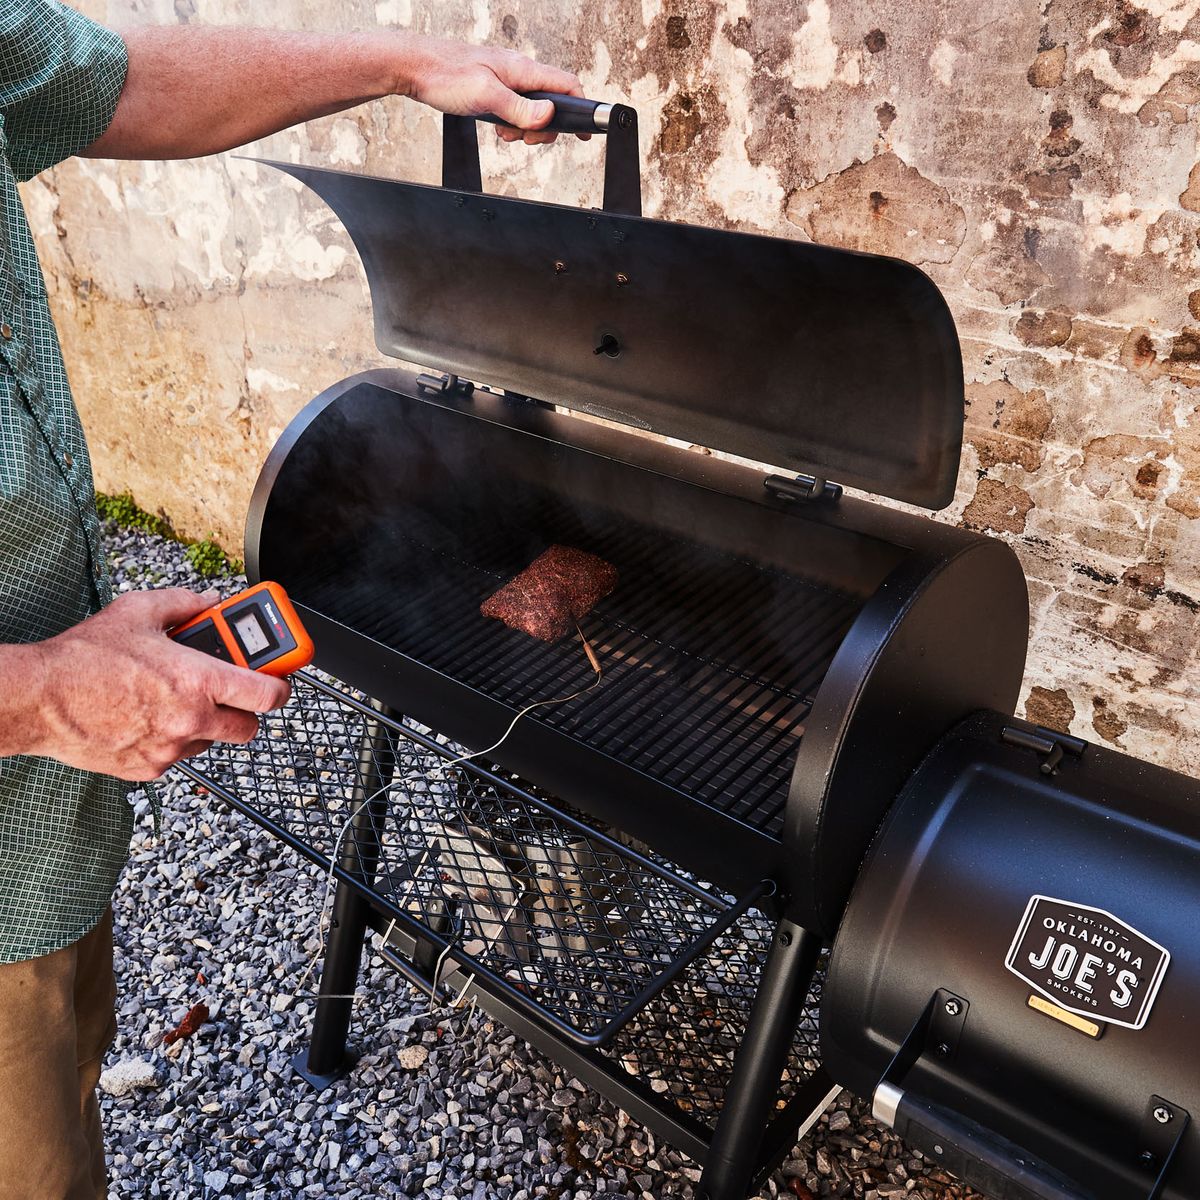 6 Best Meat Thermometers For Grilling, According To Chefs